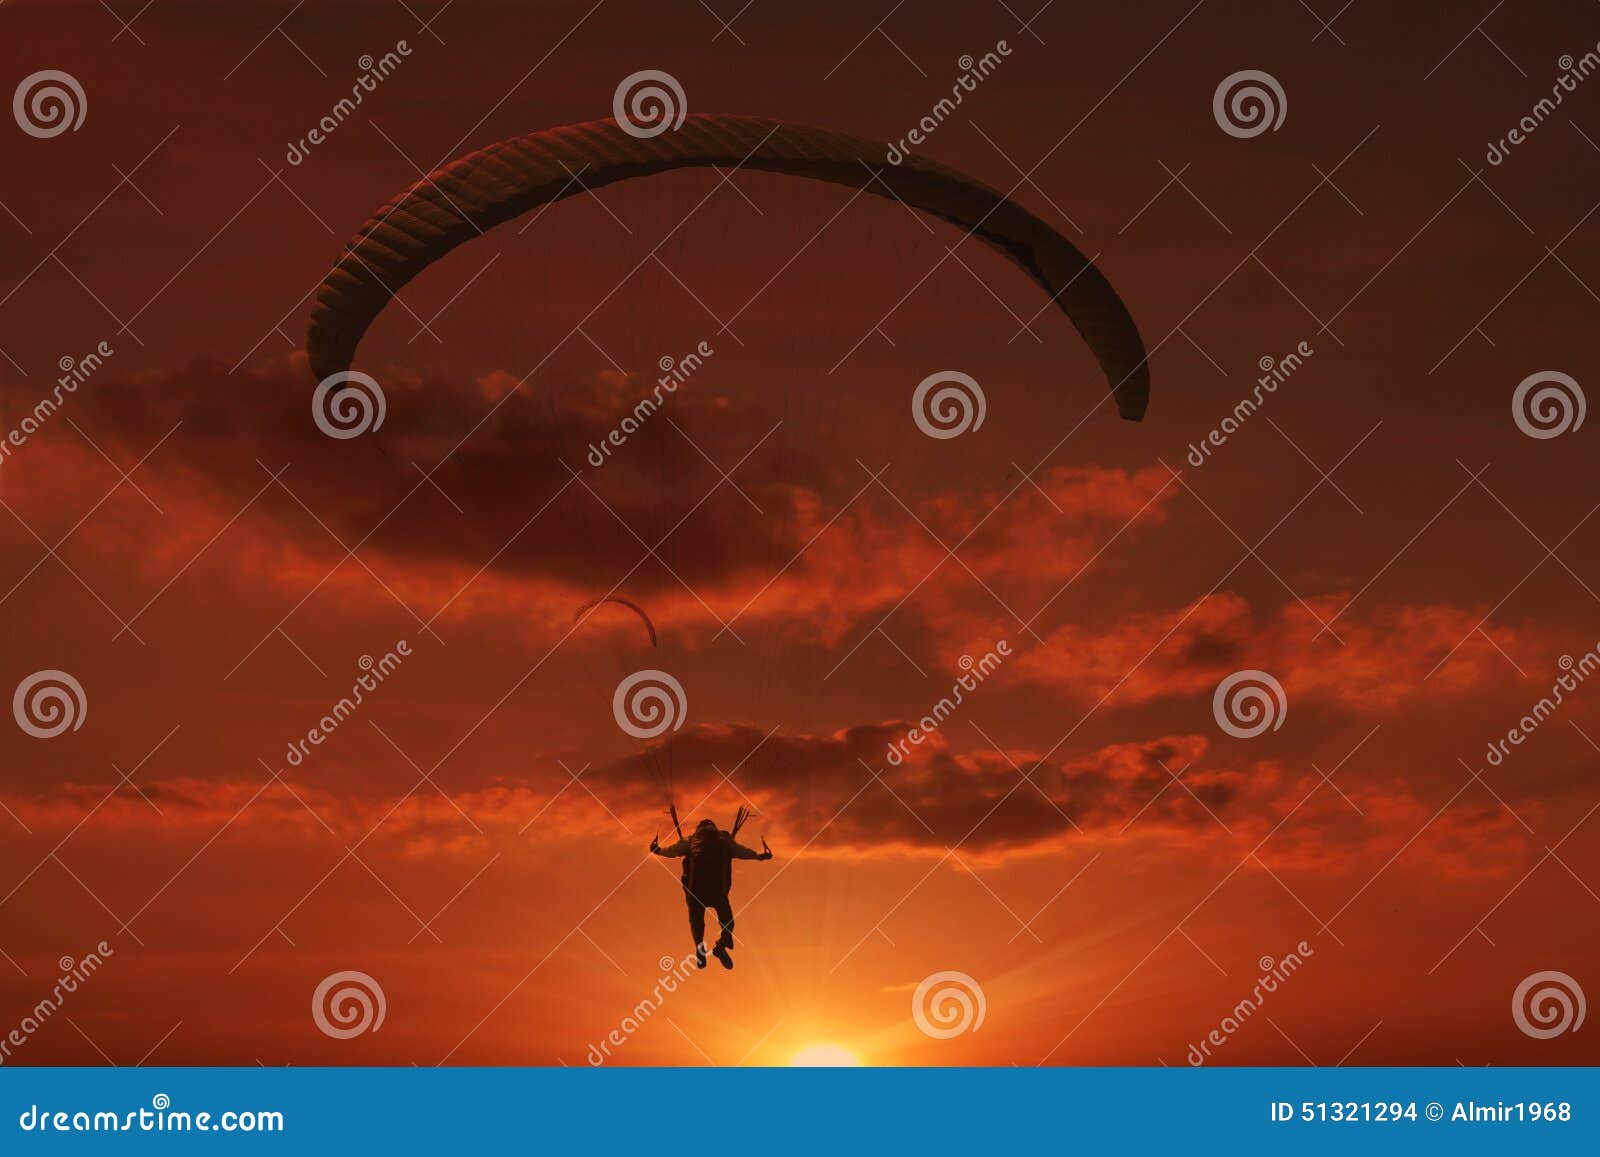 parachute in the sunset.